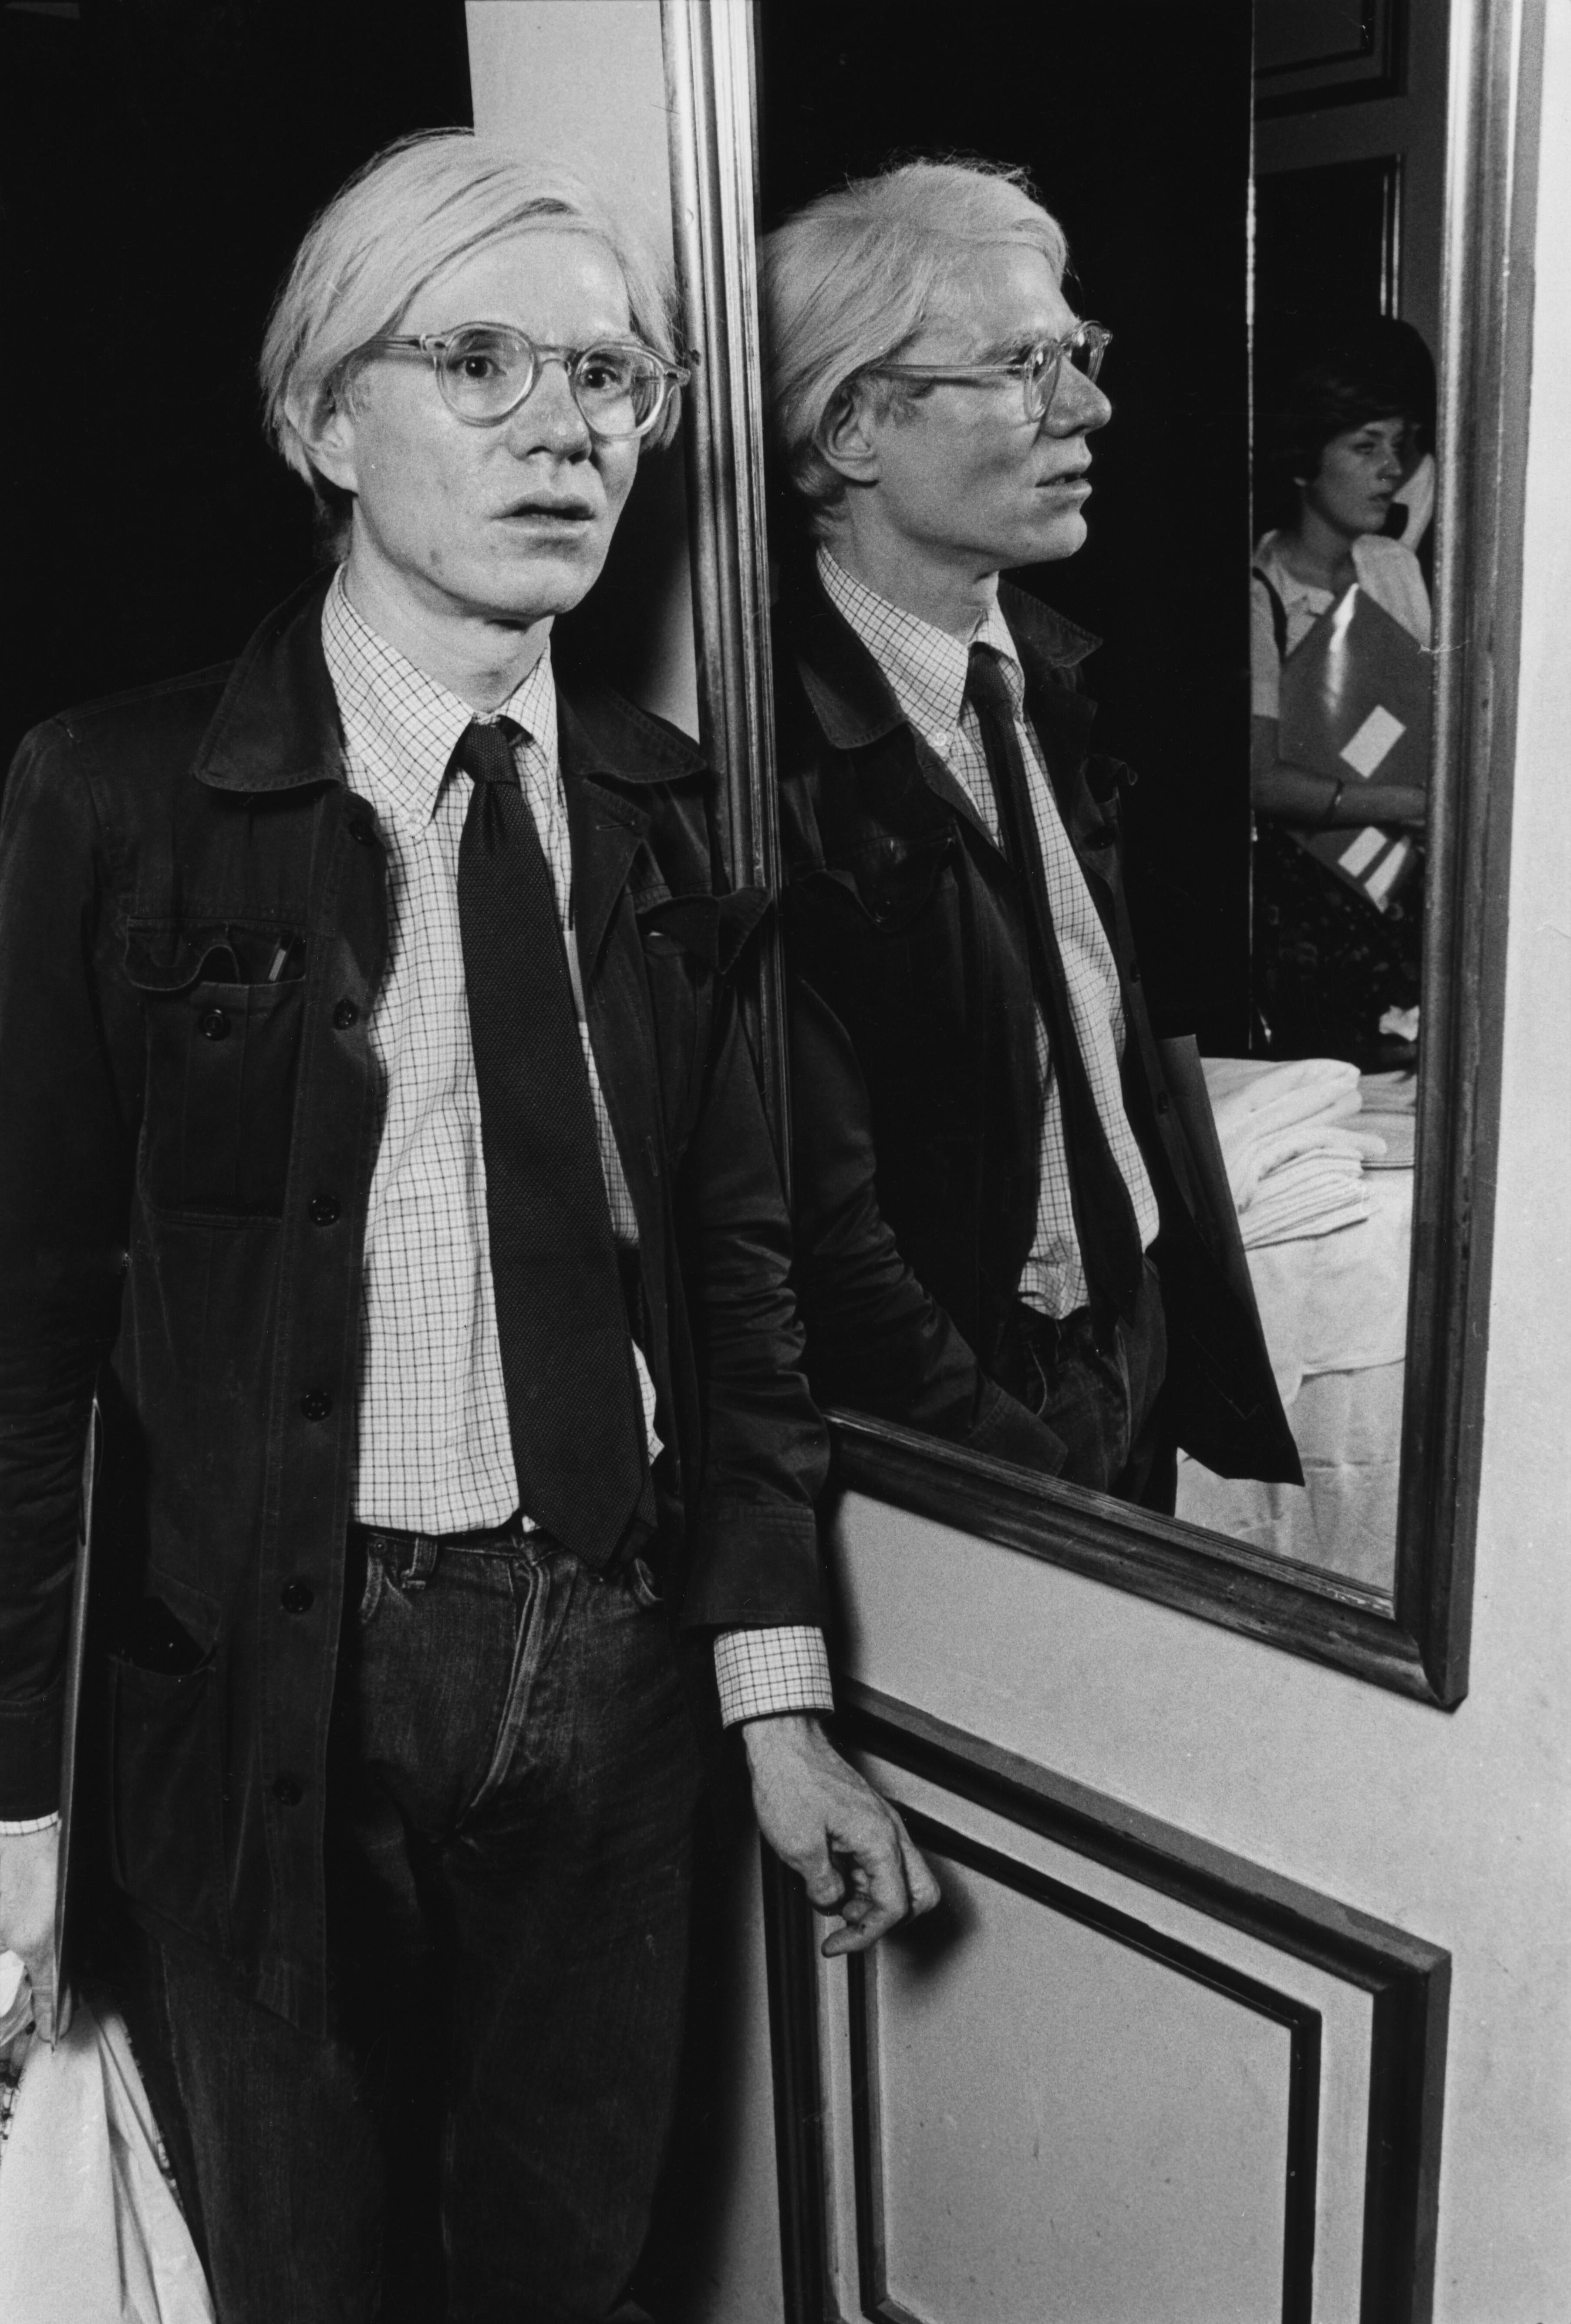 Unknown Portrait Photograph - Andy Warhol Leaning on Mirror Fine Art Print